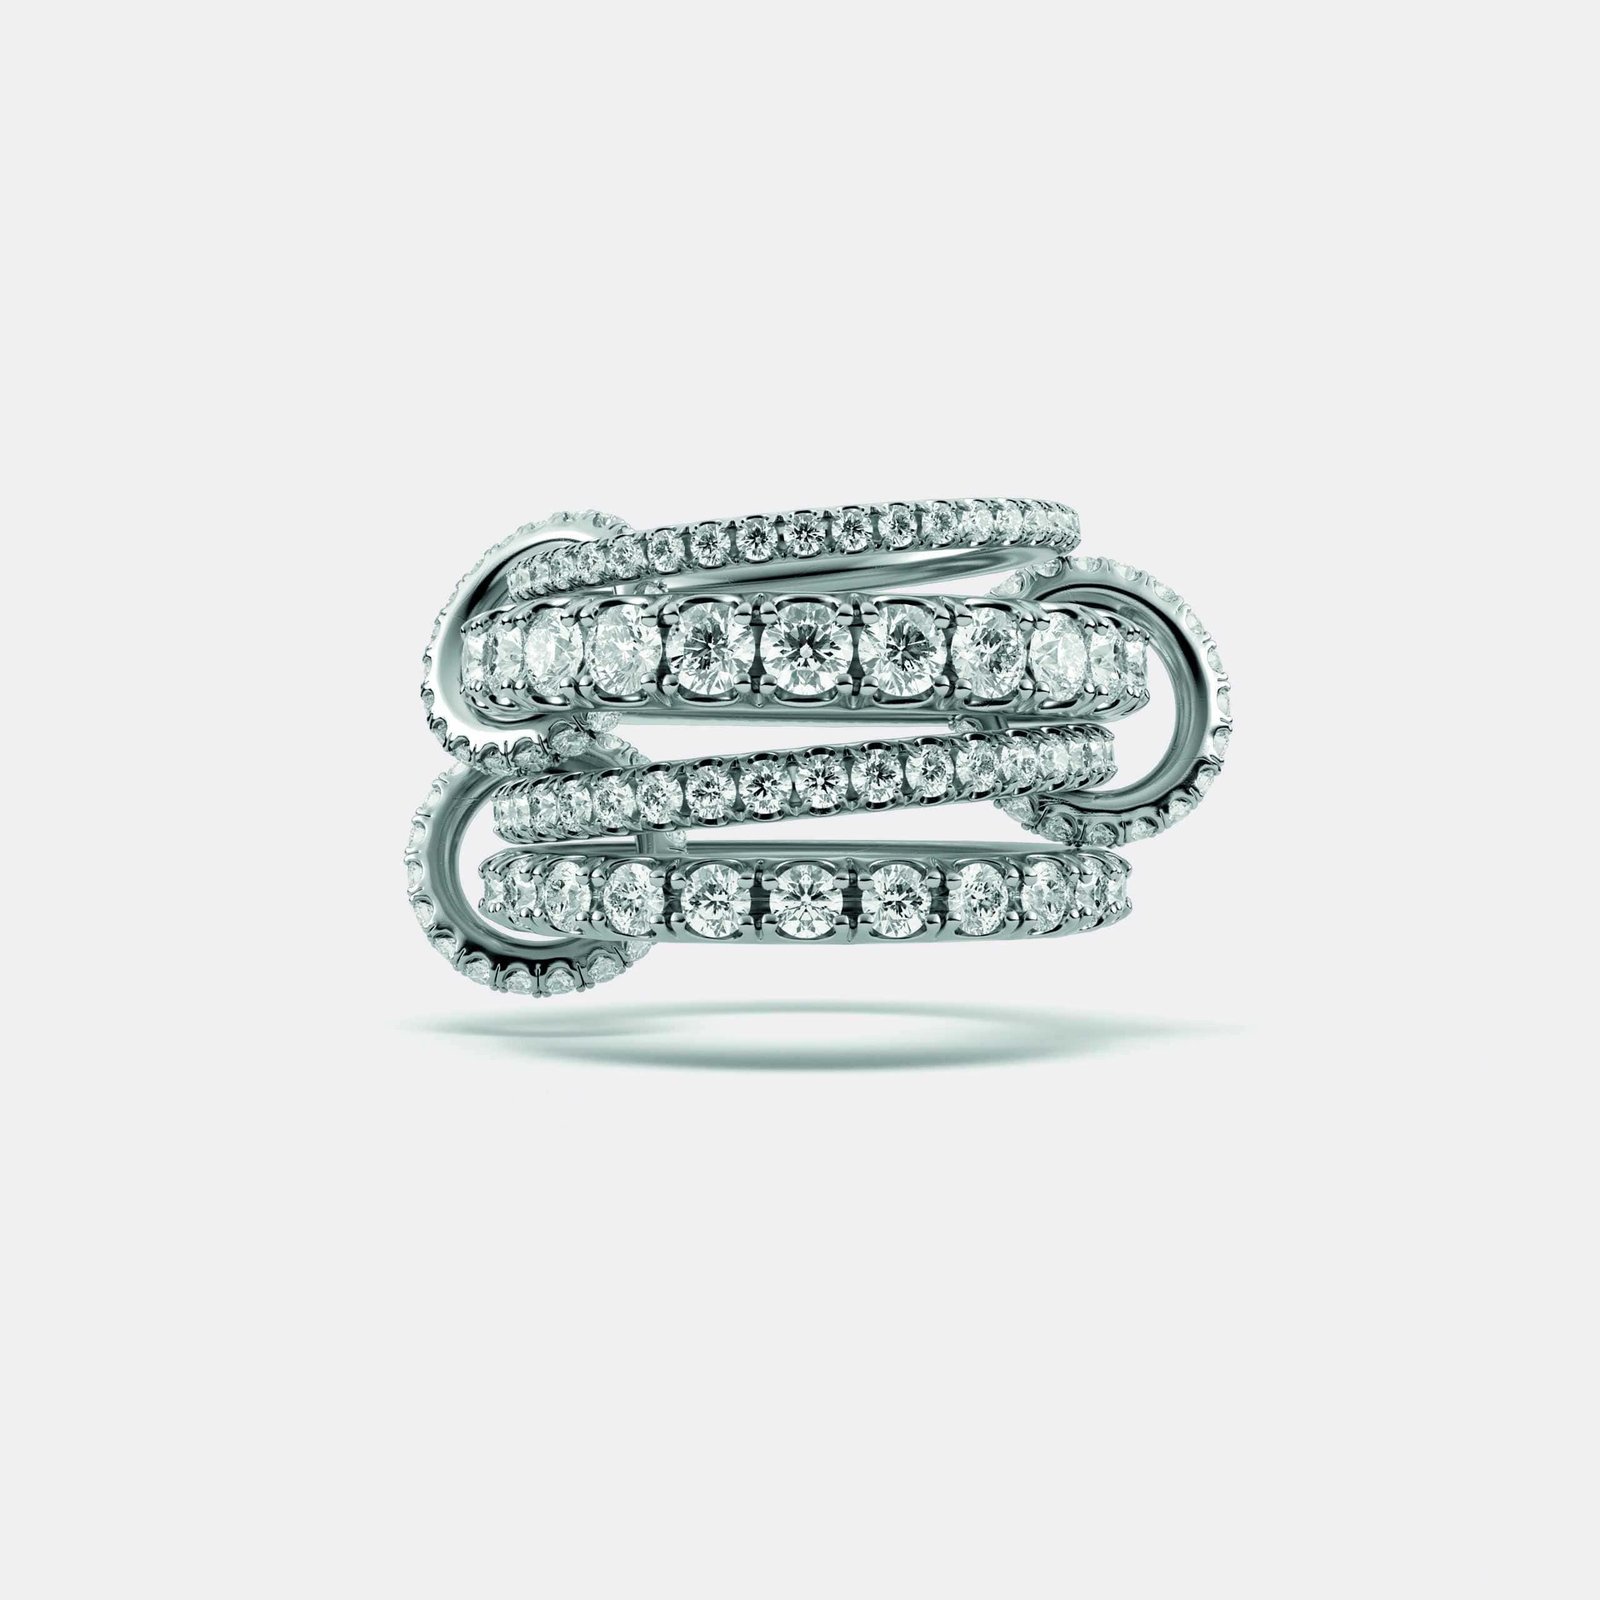 A desire-worthy white gold ring featuring three rows of stunning diamonds.